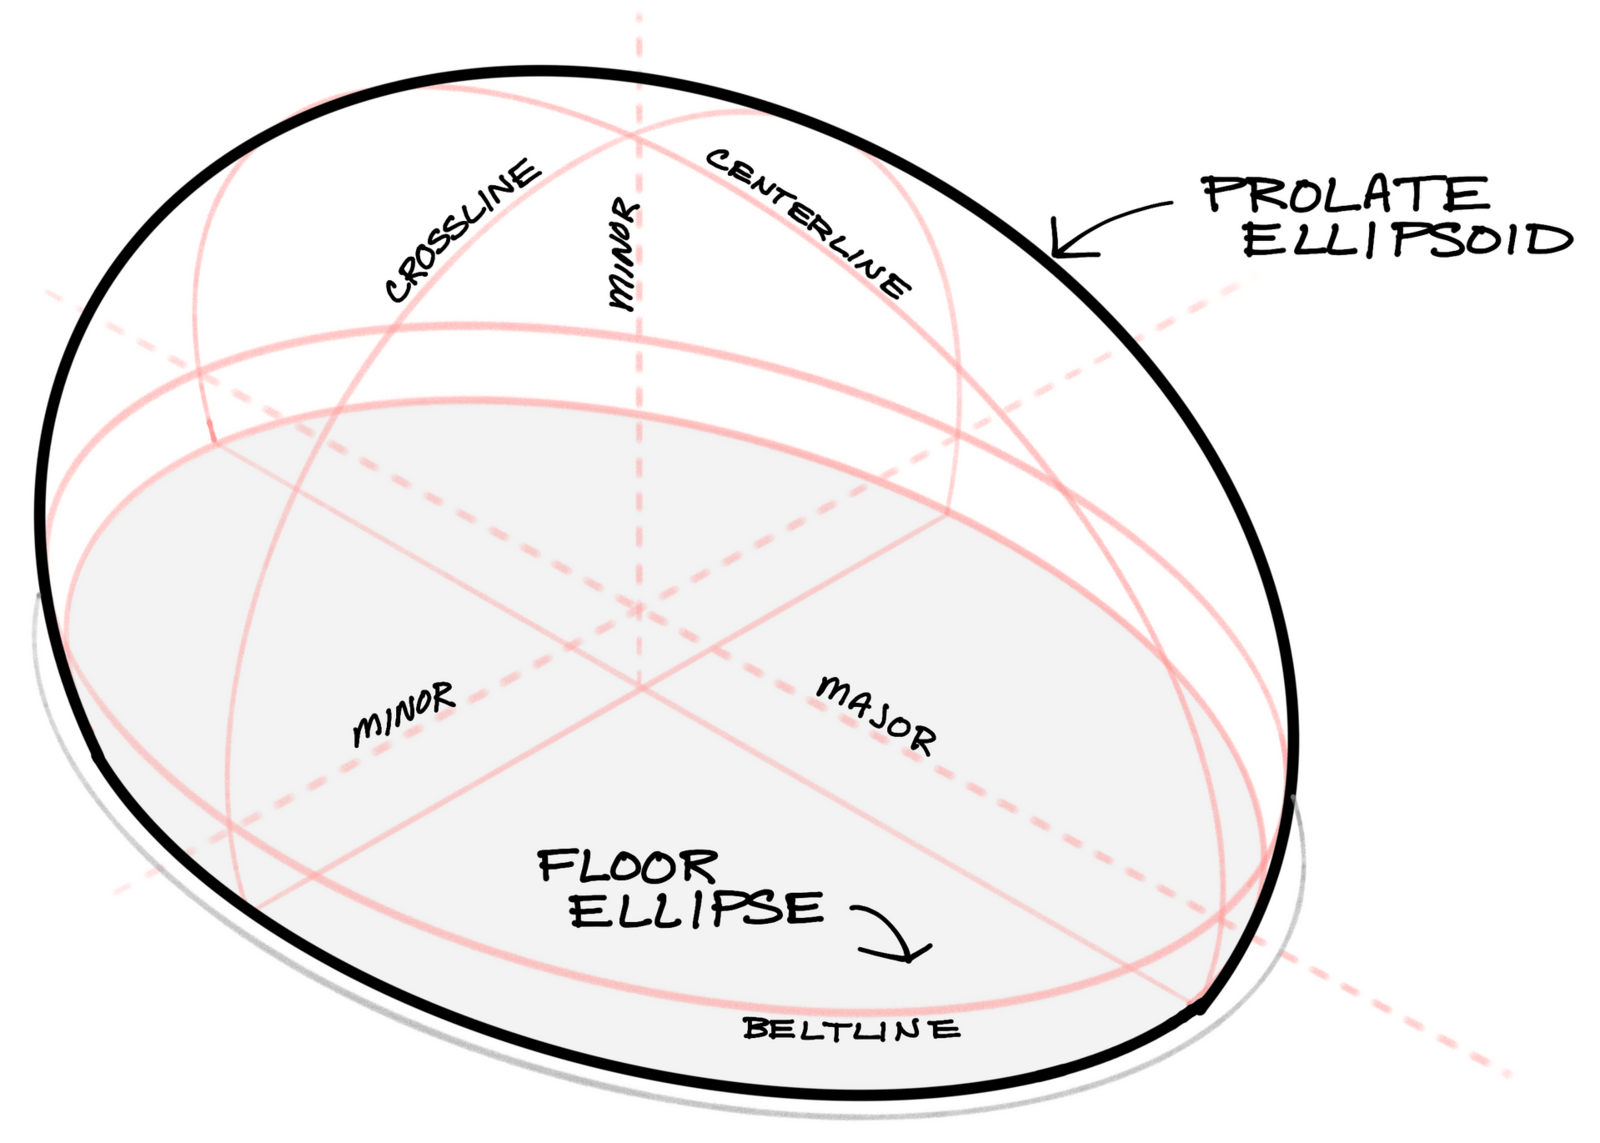 Sketch of the prolate ellipsoid used for the Eye of the Storm dome home.